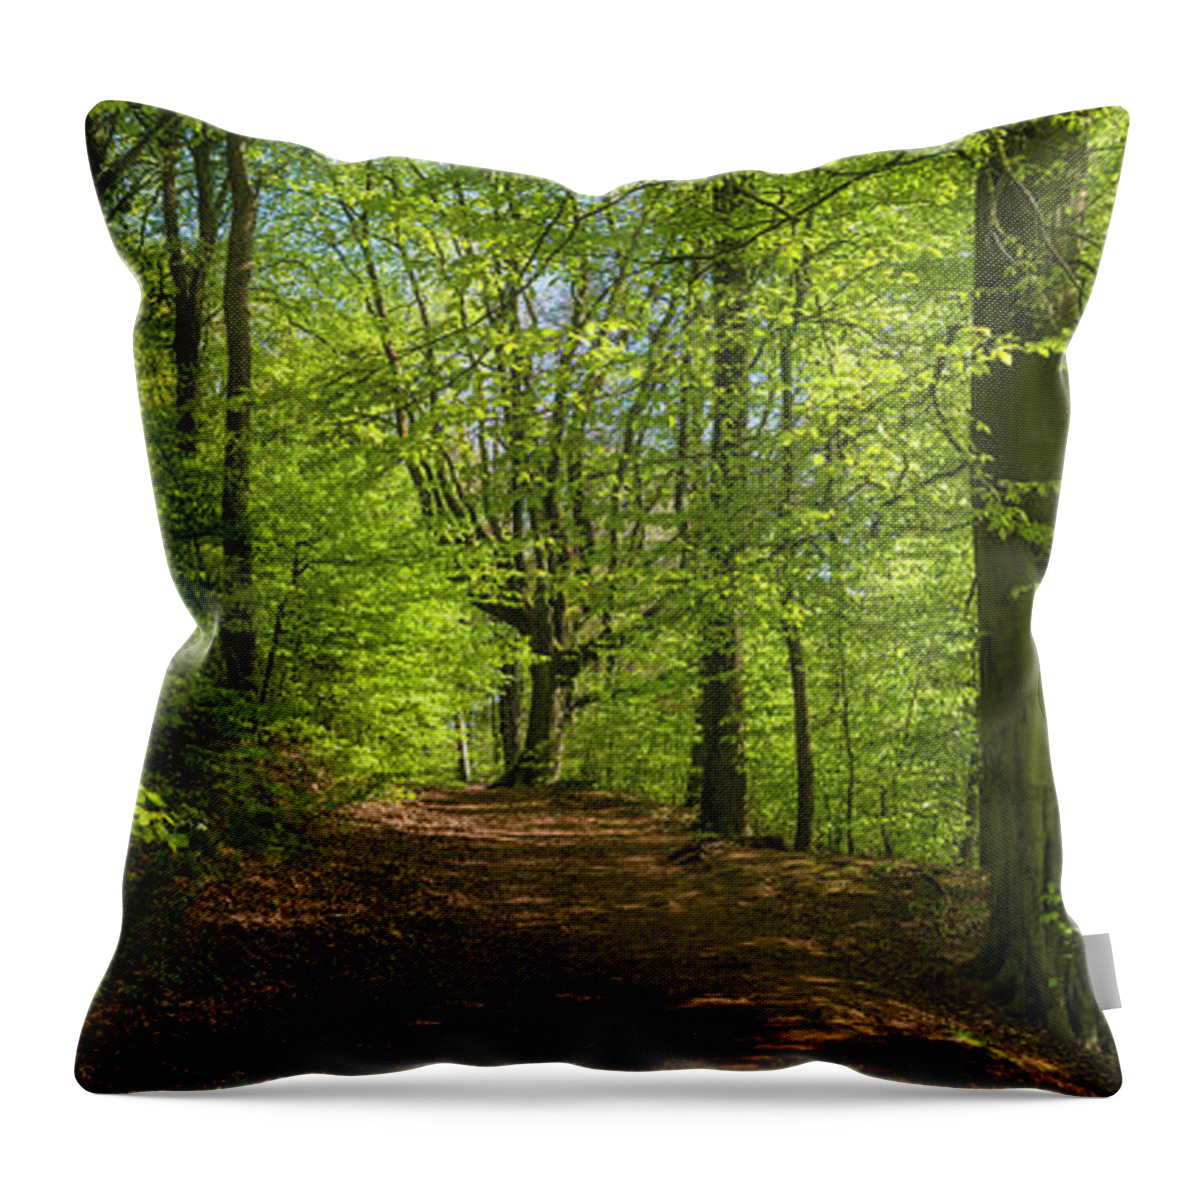 Scenics Throw Pillow featuring the photograph Idyllic Trail Through Vibrant Green by Fotovoyager